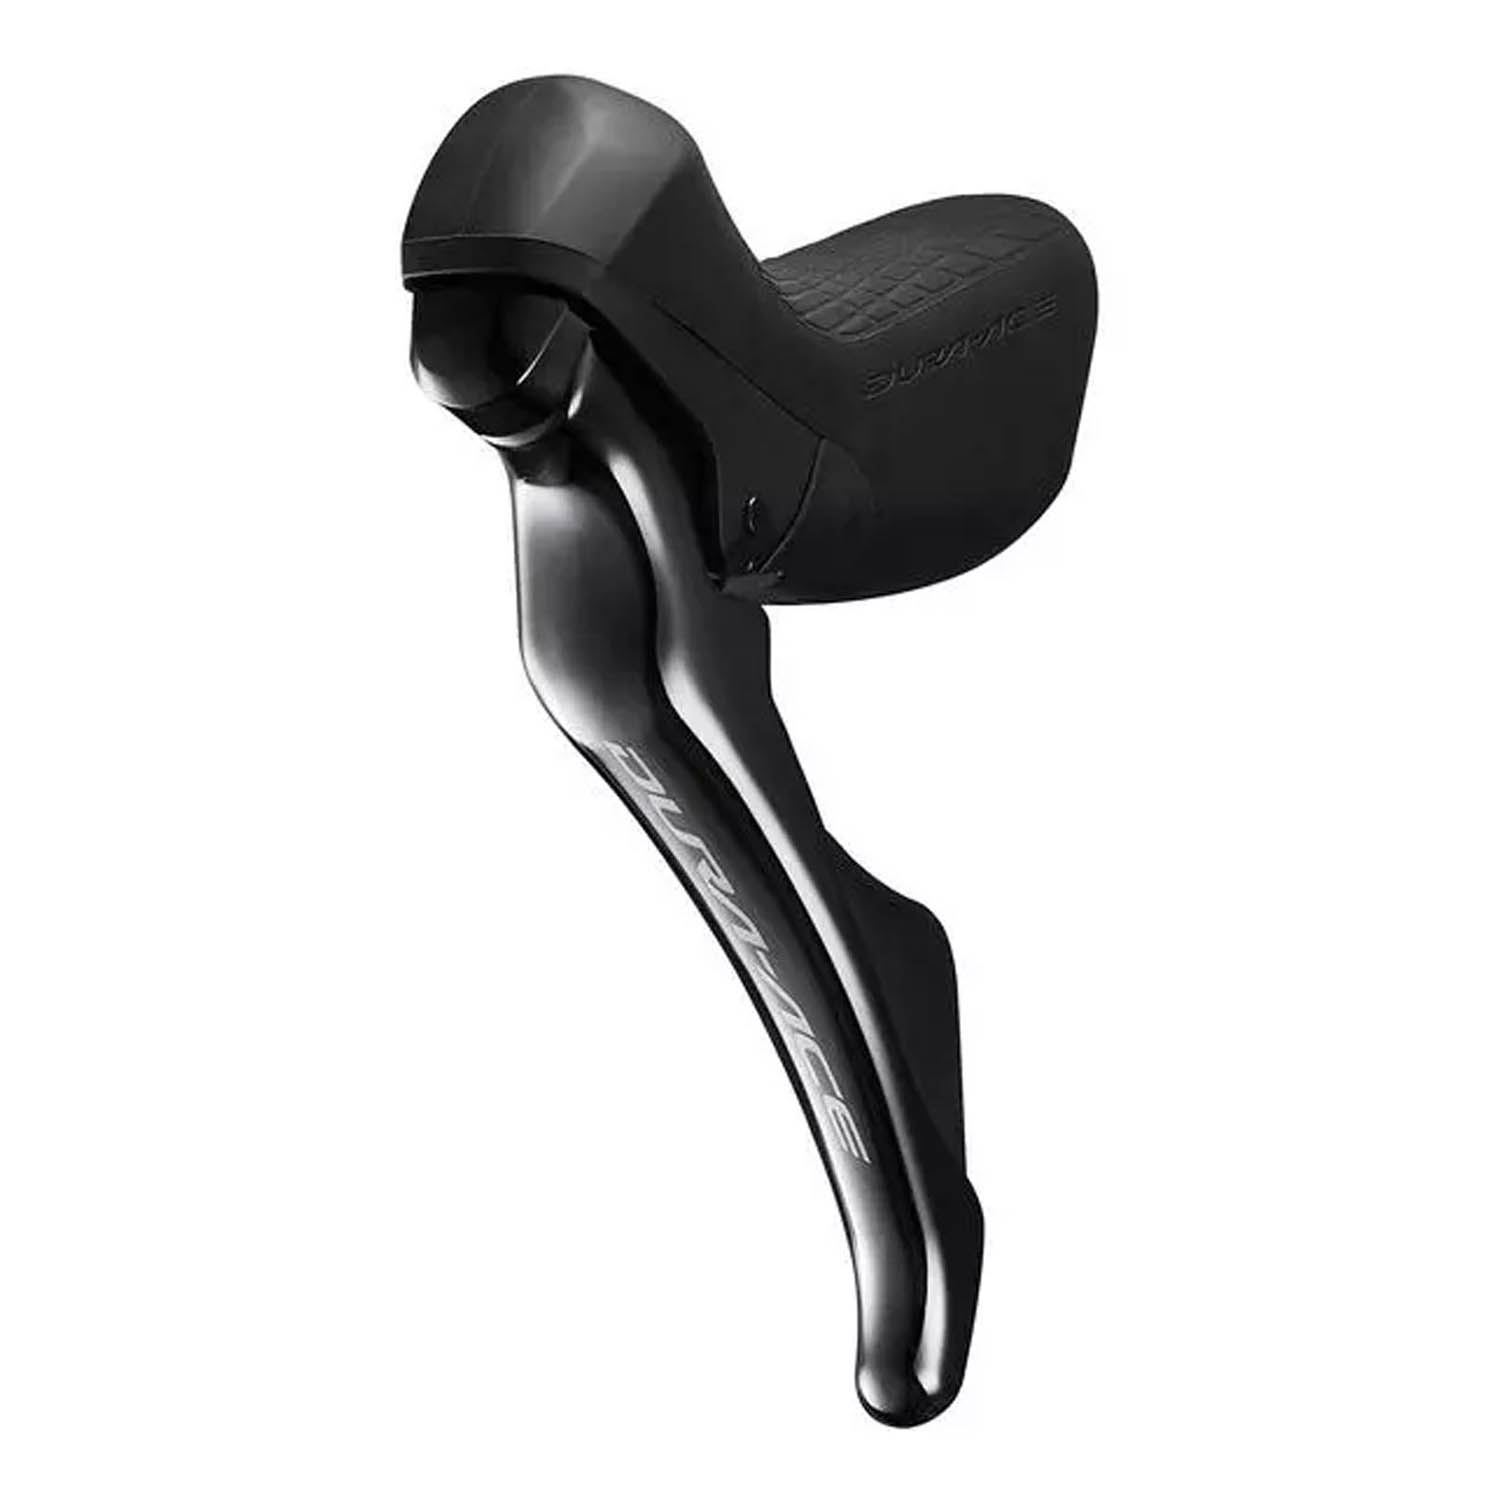 Shimano racefiets shifters Dura-Ace R9100